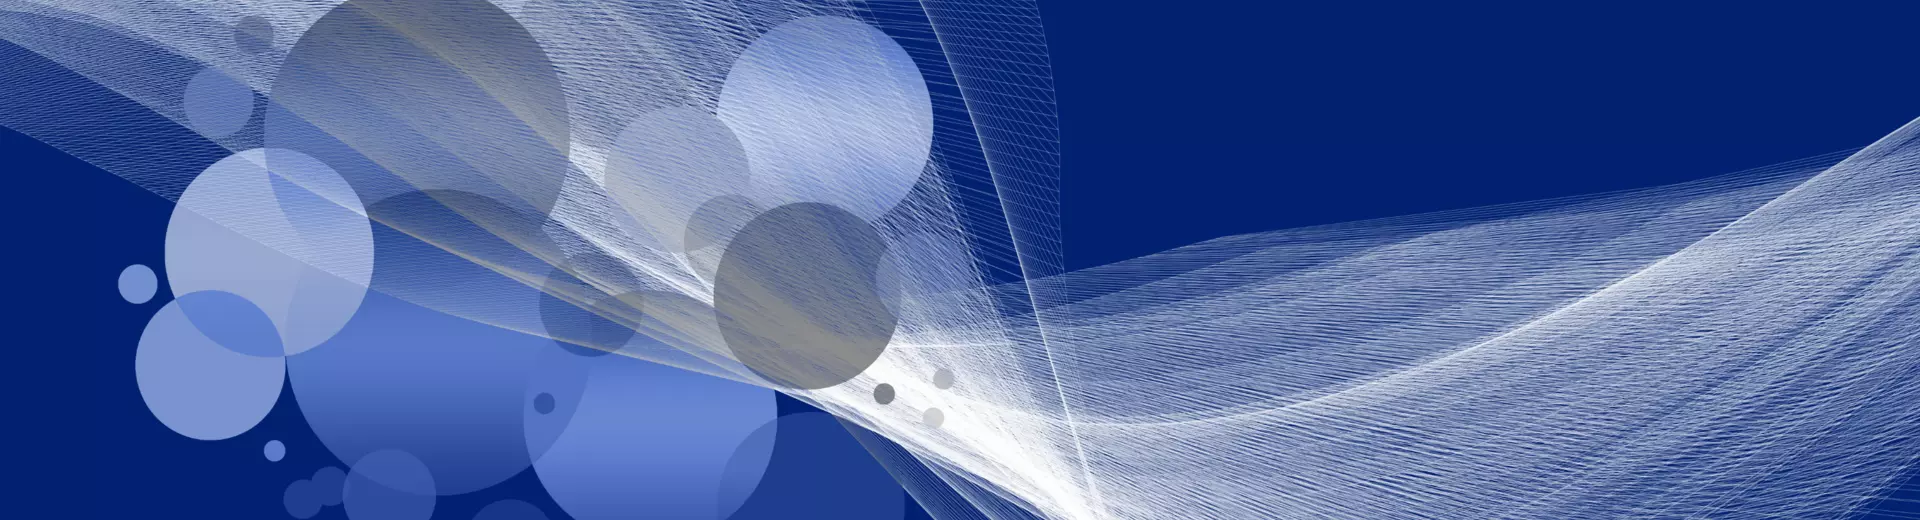 Abstract image of a white wave and bubbles over a blue background